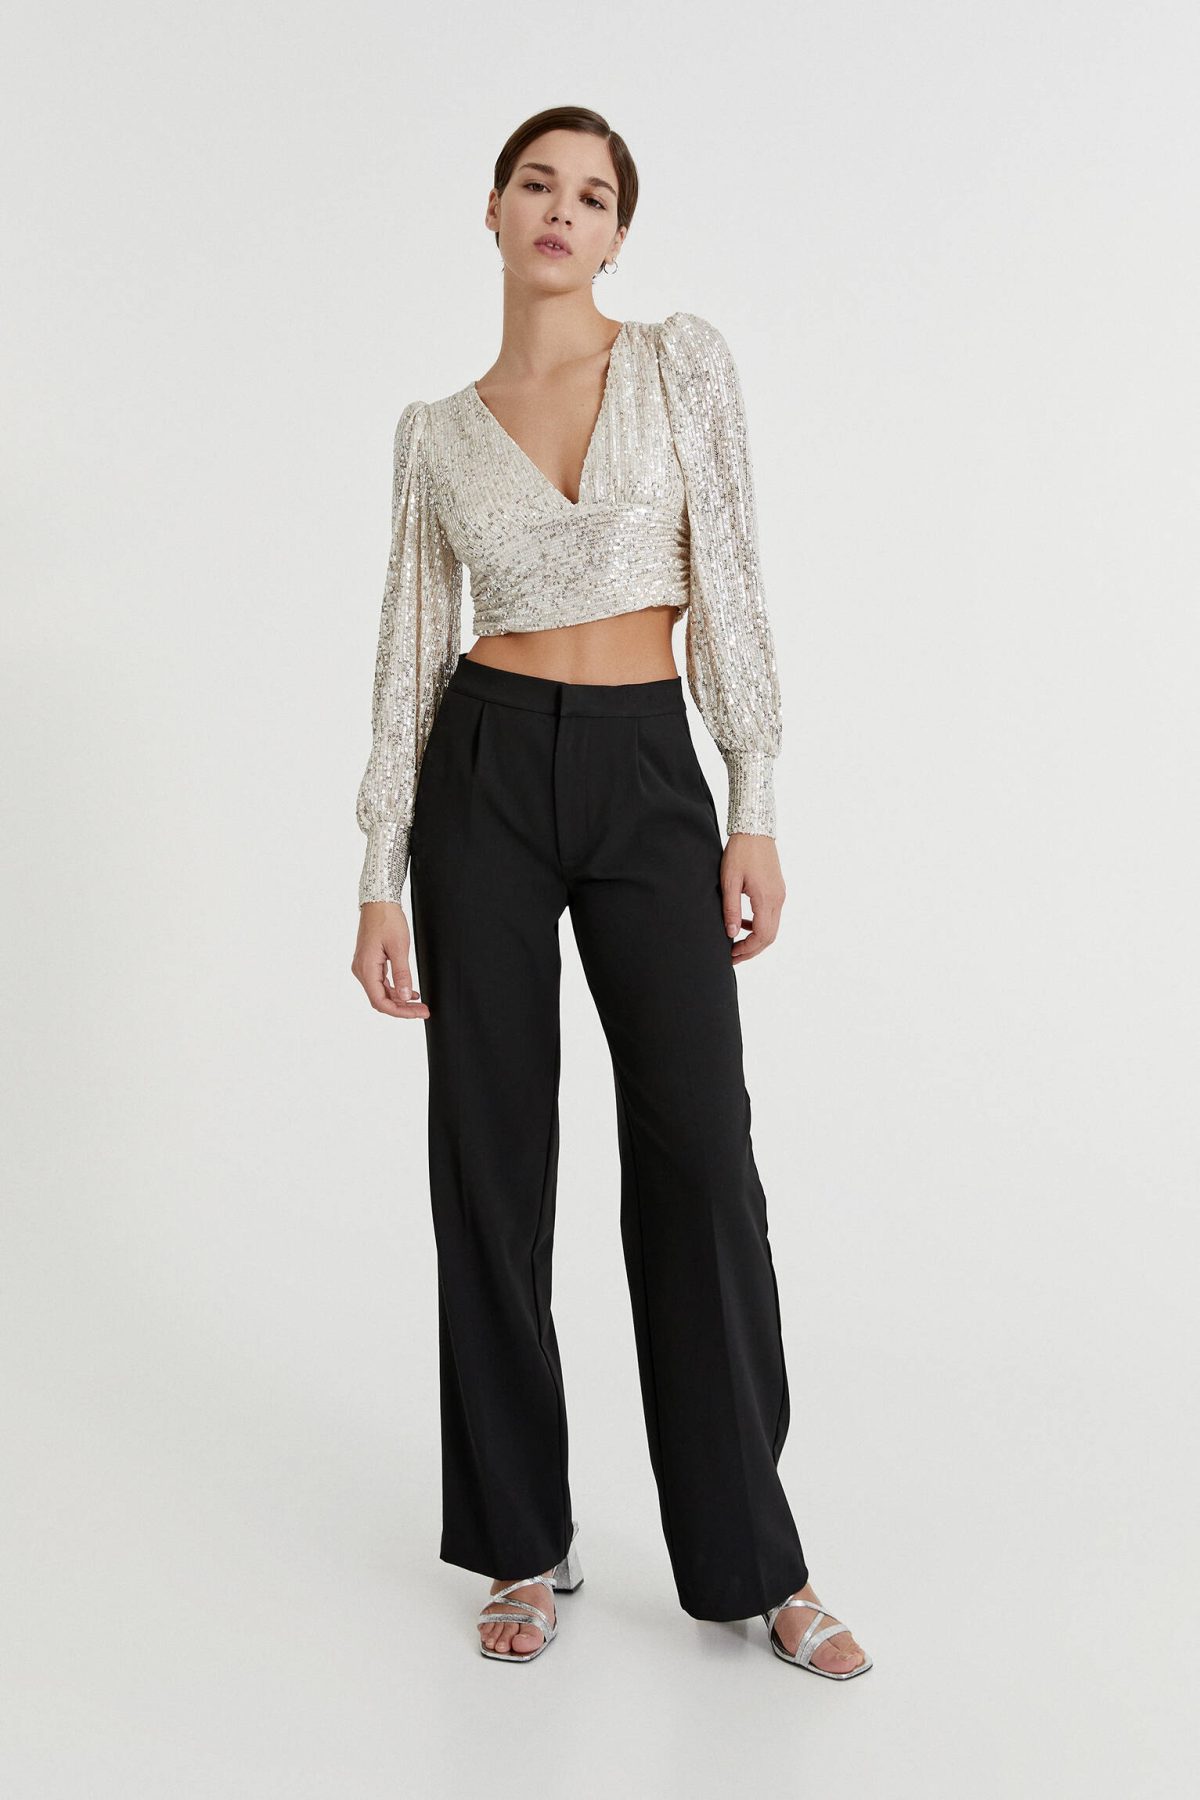 Party Puff Sleeve Sequined Long Sleeve Top in T-shirts & Tops